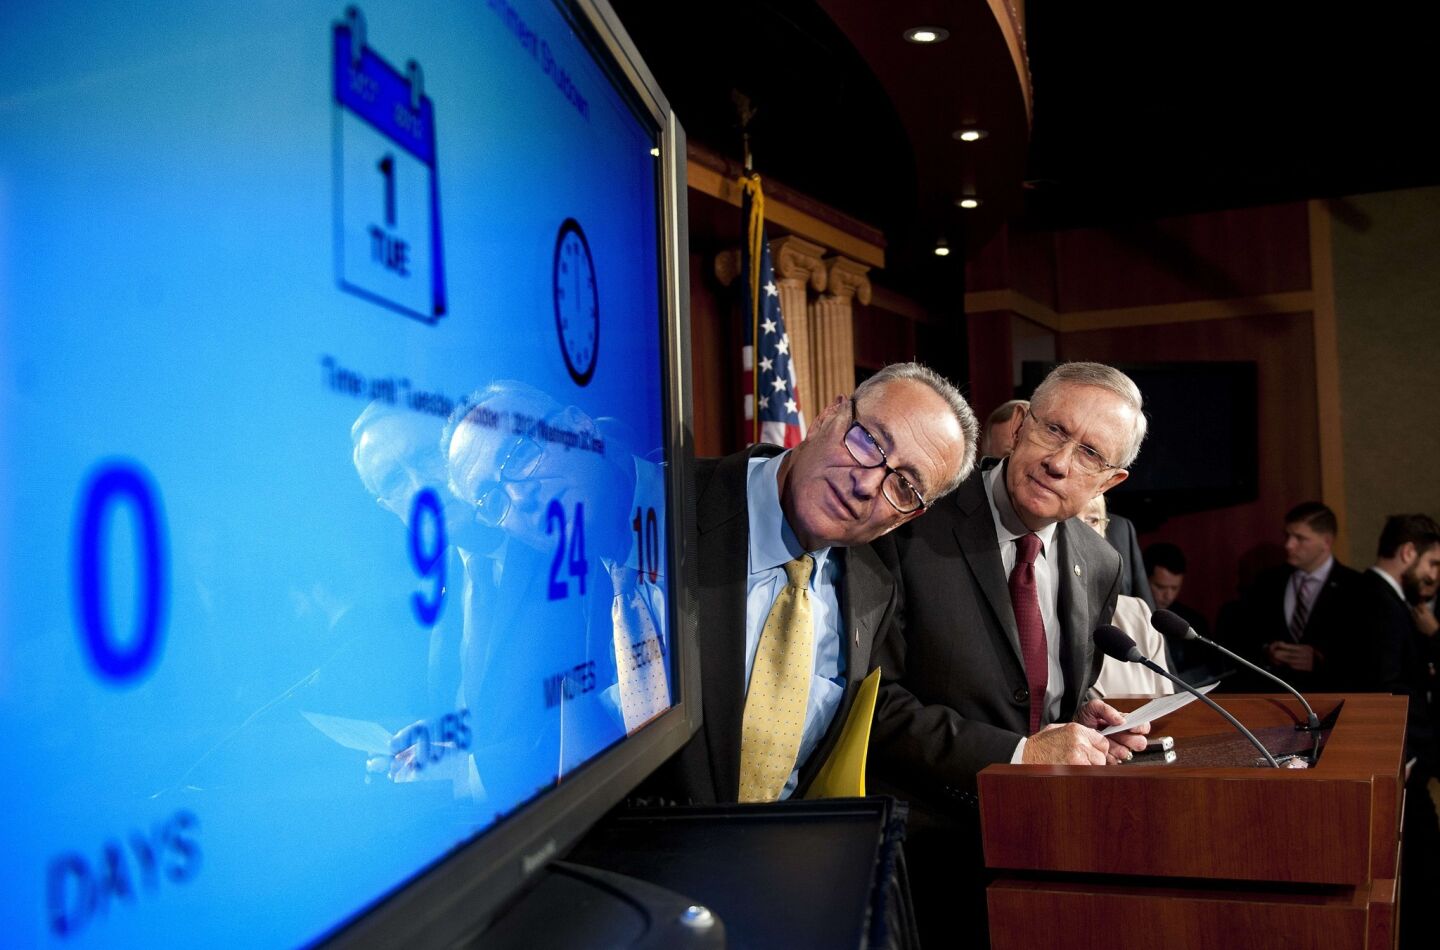 Senate Majority Leader Harry Reid (D-Nev.) and Sen. Charles E. Schumer (D-N.Y.), at a news conference, look at a display of the time left until a government shutdown.